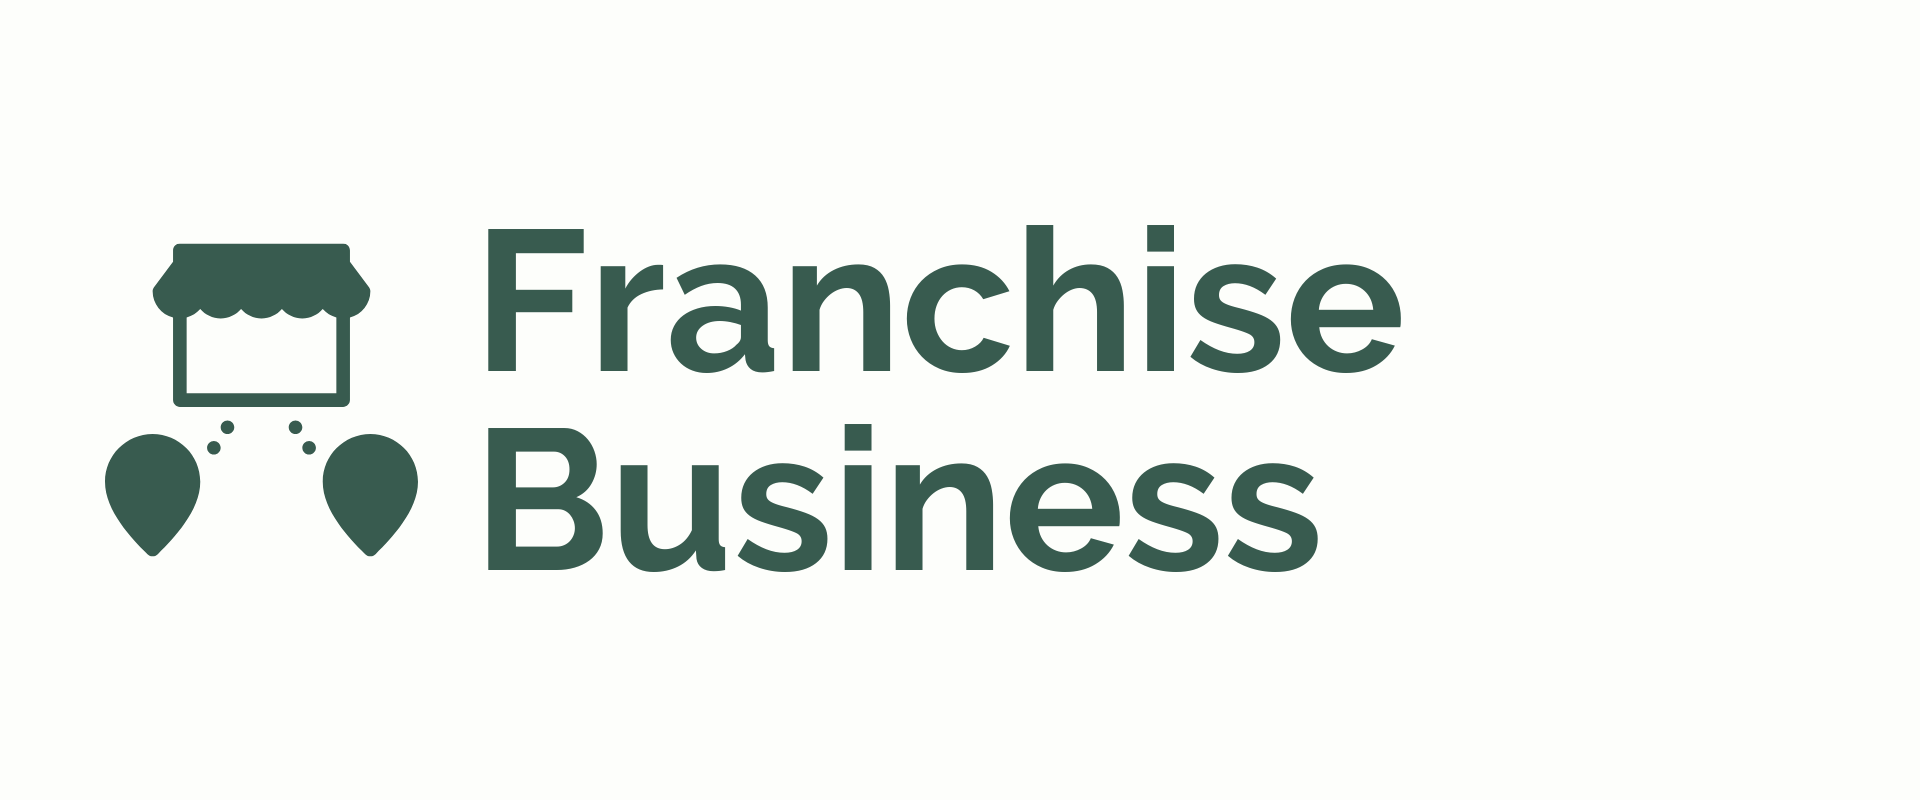 Franchise Business investments -diarynigracia